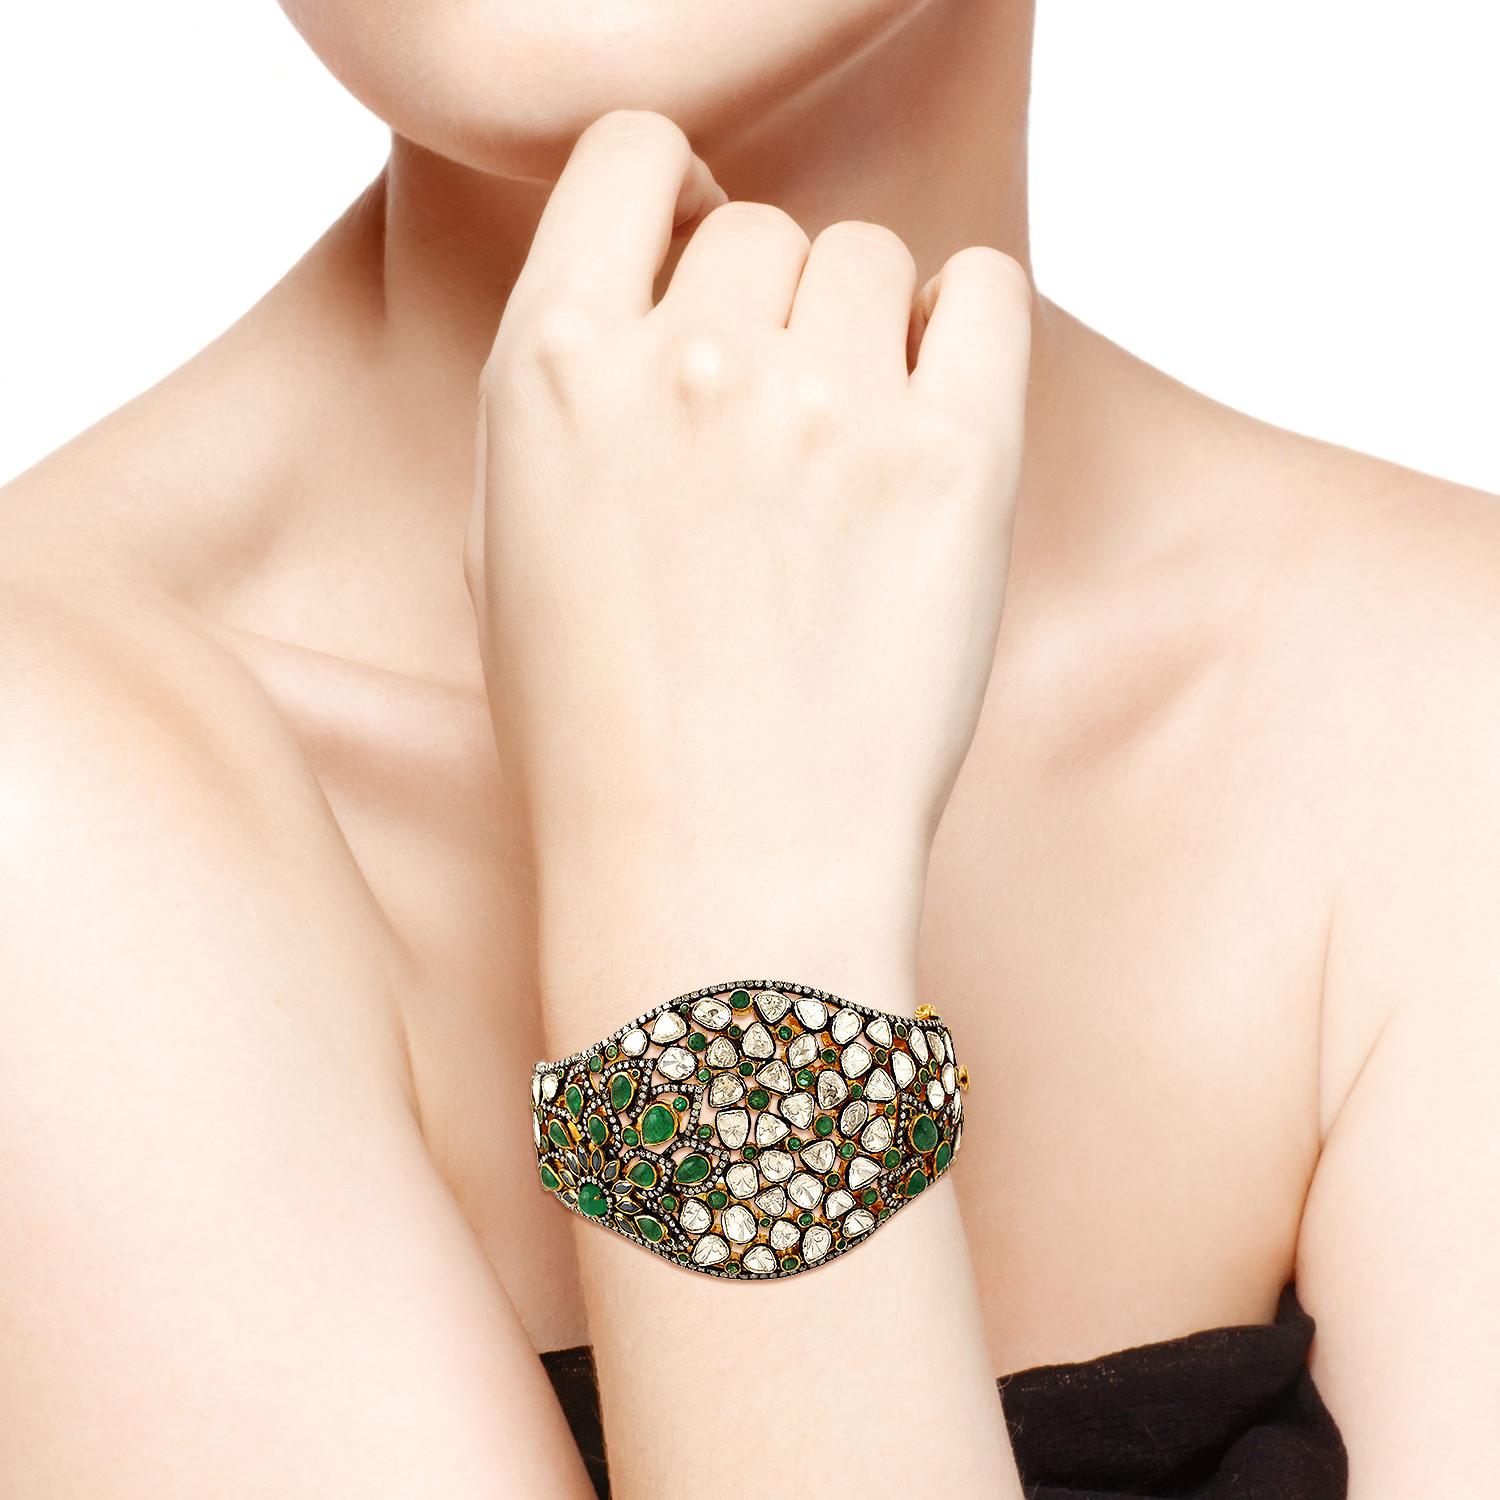 A stunning bracelet handmade in 18K gold & sterling silver with blackened finish. It is set in 8.23 carats emerald, 1.07 carats spinel & 14.1 carats rosecut diamonds. Clasp Closure. Instock

FOLLOW  MEGHNA JEWELS storefront to view the latest